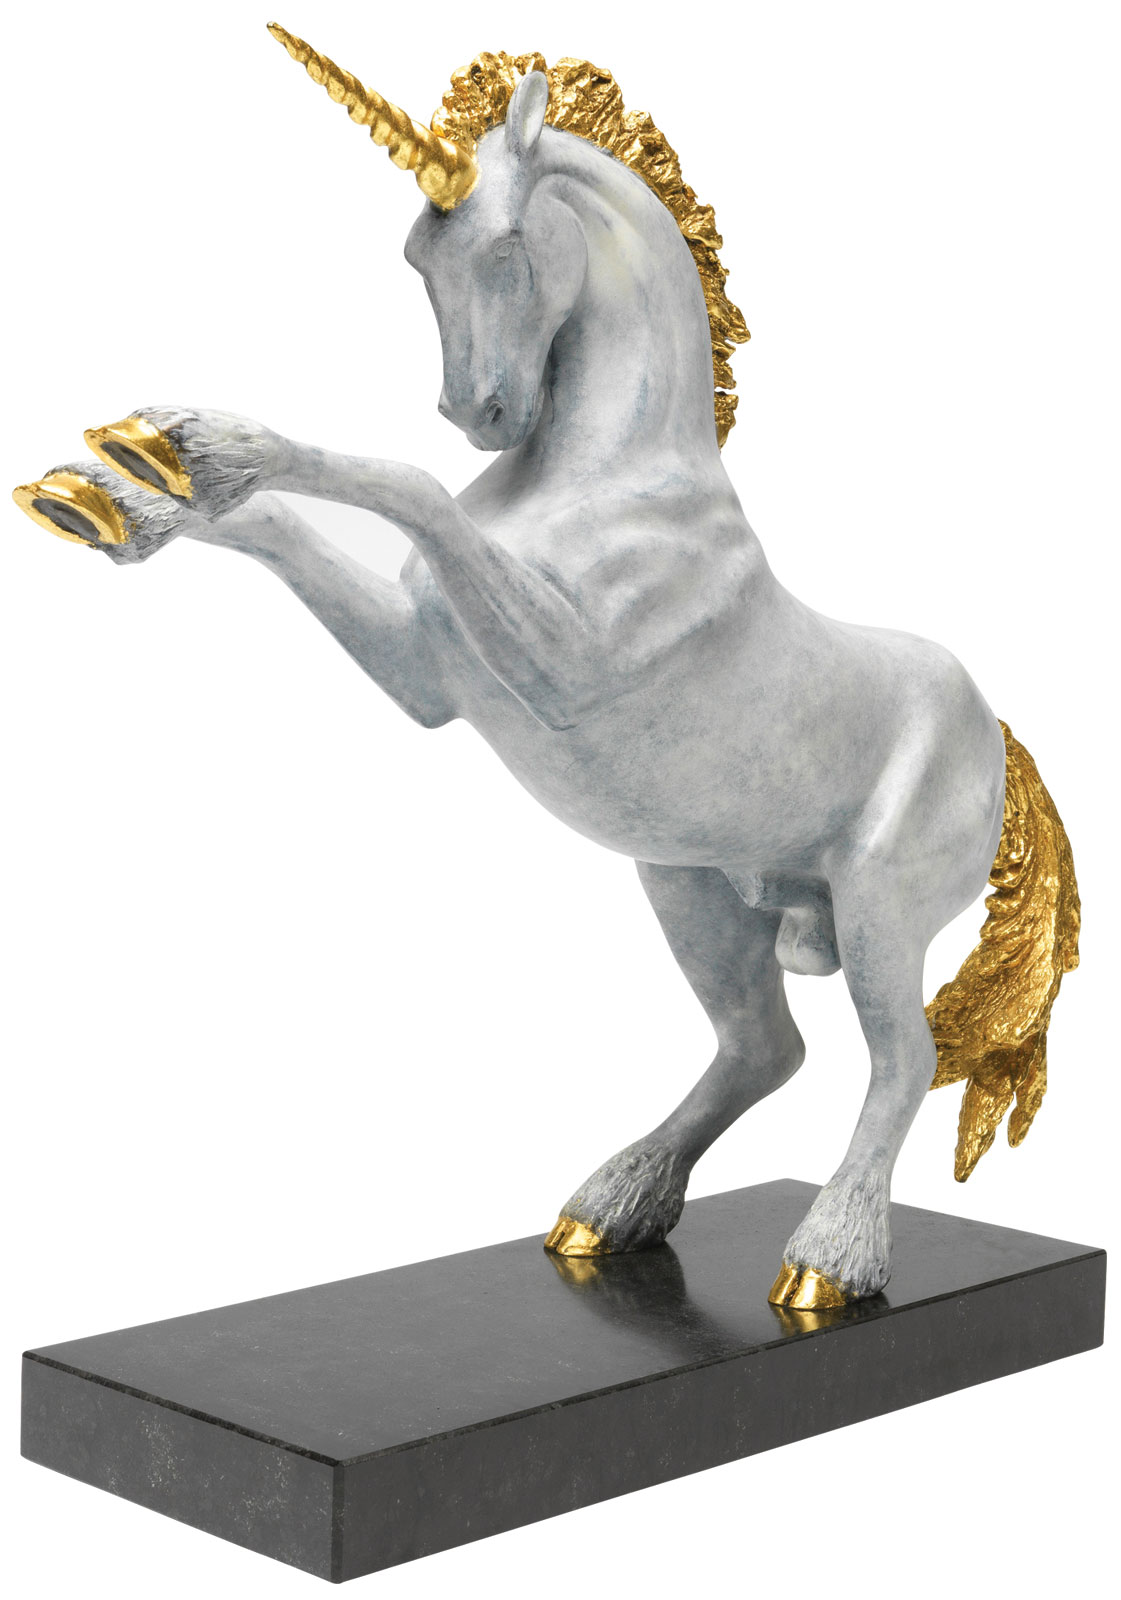 Sculpture "Unicorn" (2015), bronze version white partially gold-plated by Joseph F. Askew